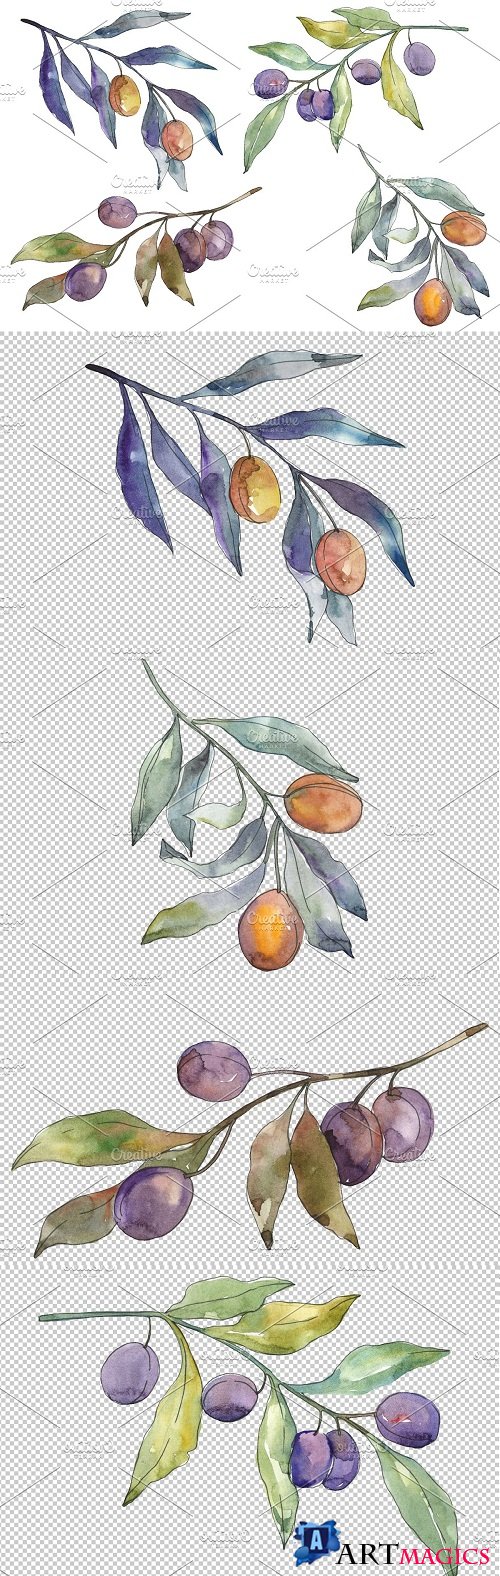 Olives 3 Watercolor png - 3584505